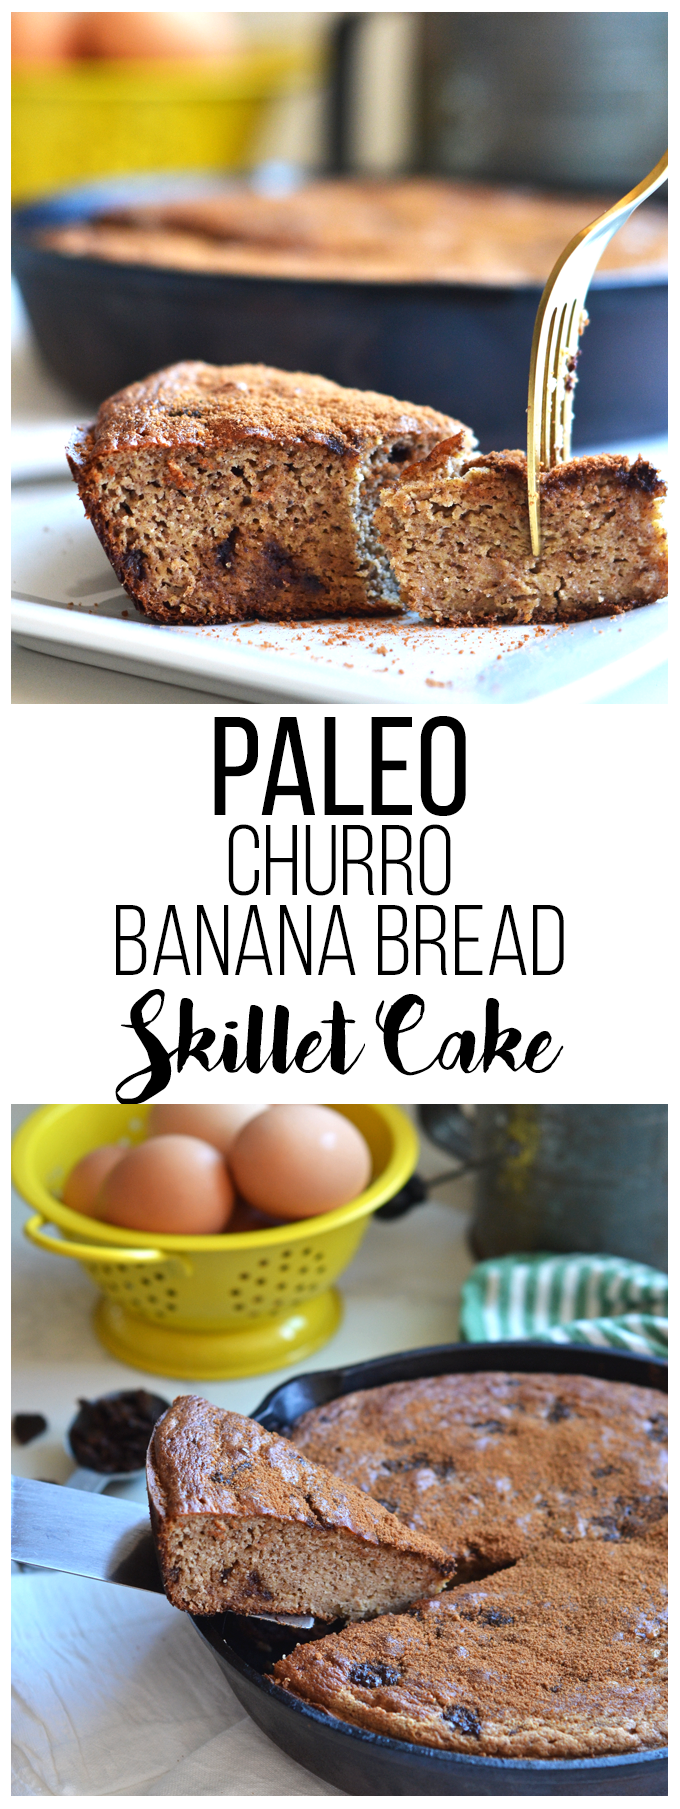 This Churro Banana Bread Skillet Cake is the perfect easter or spring dessert and loved by all ages! Paleo, Grain Free and full of flavor, you would never know it's healthy!